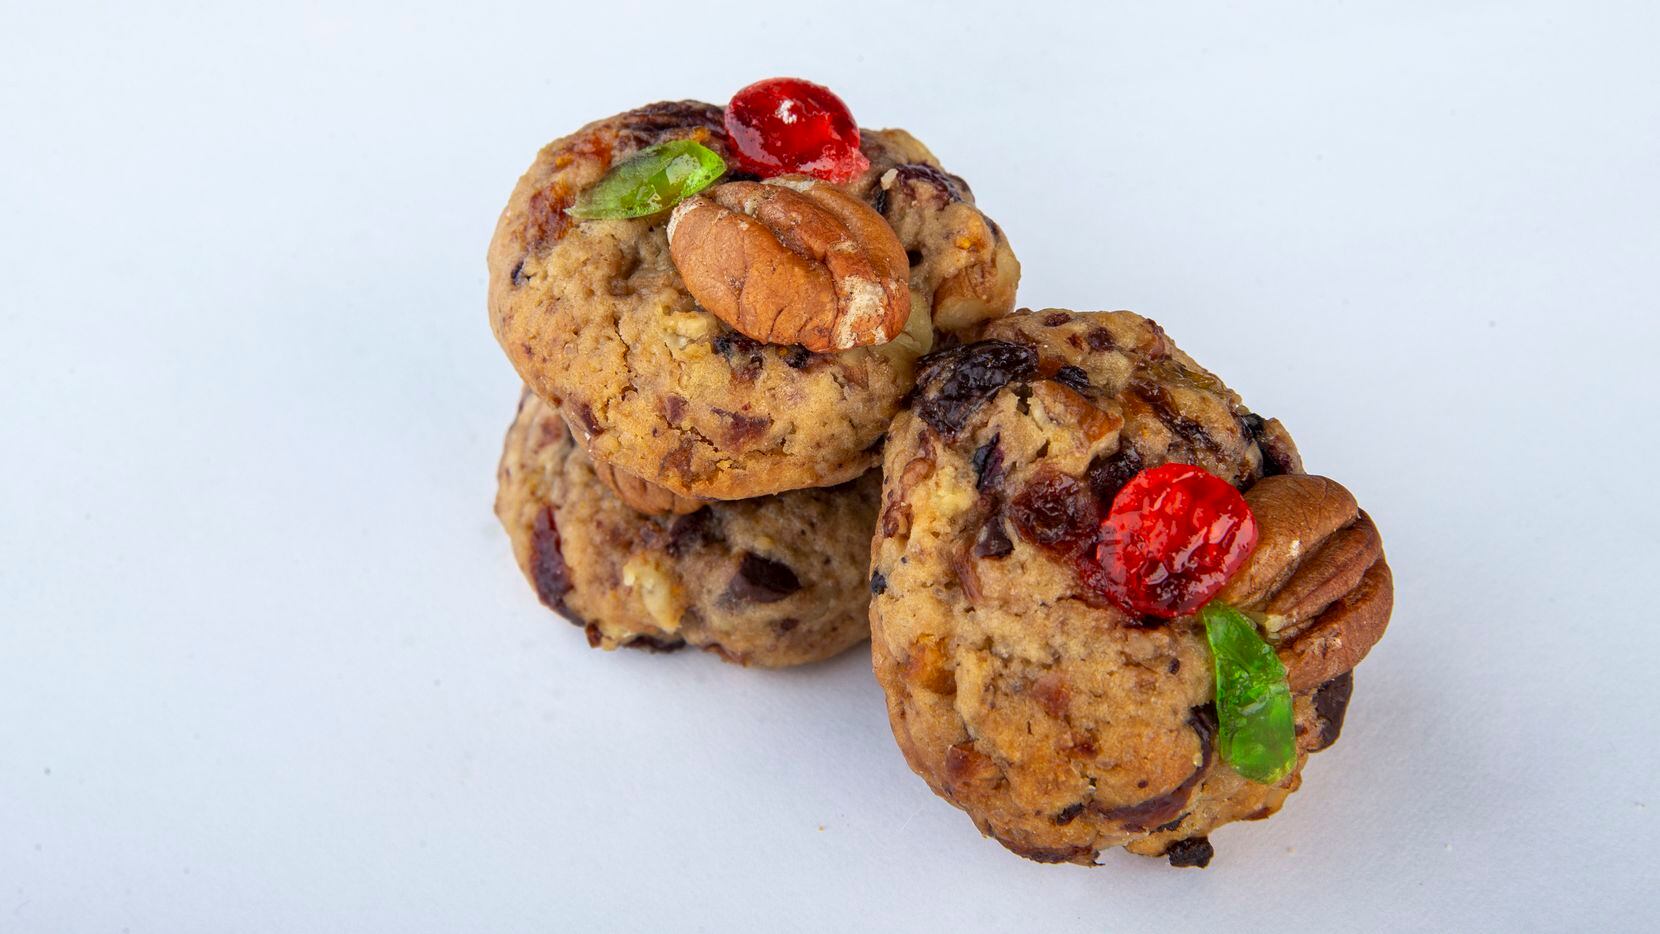 The Nandy's fruit cake cookies made by Suzy Cravens won the classic cookie category of the...